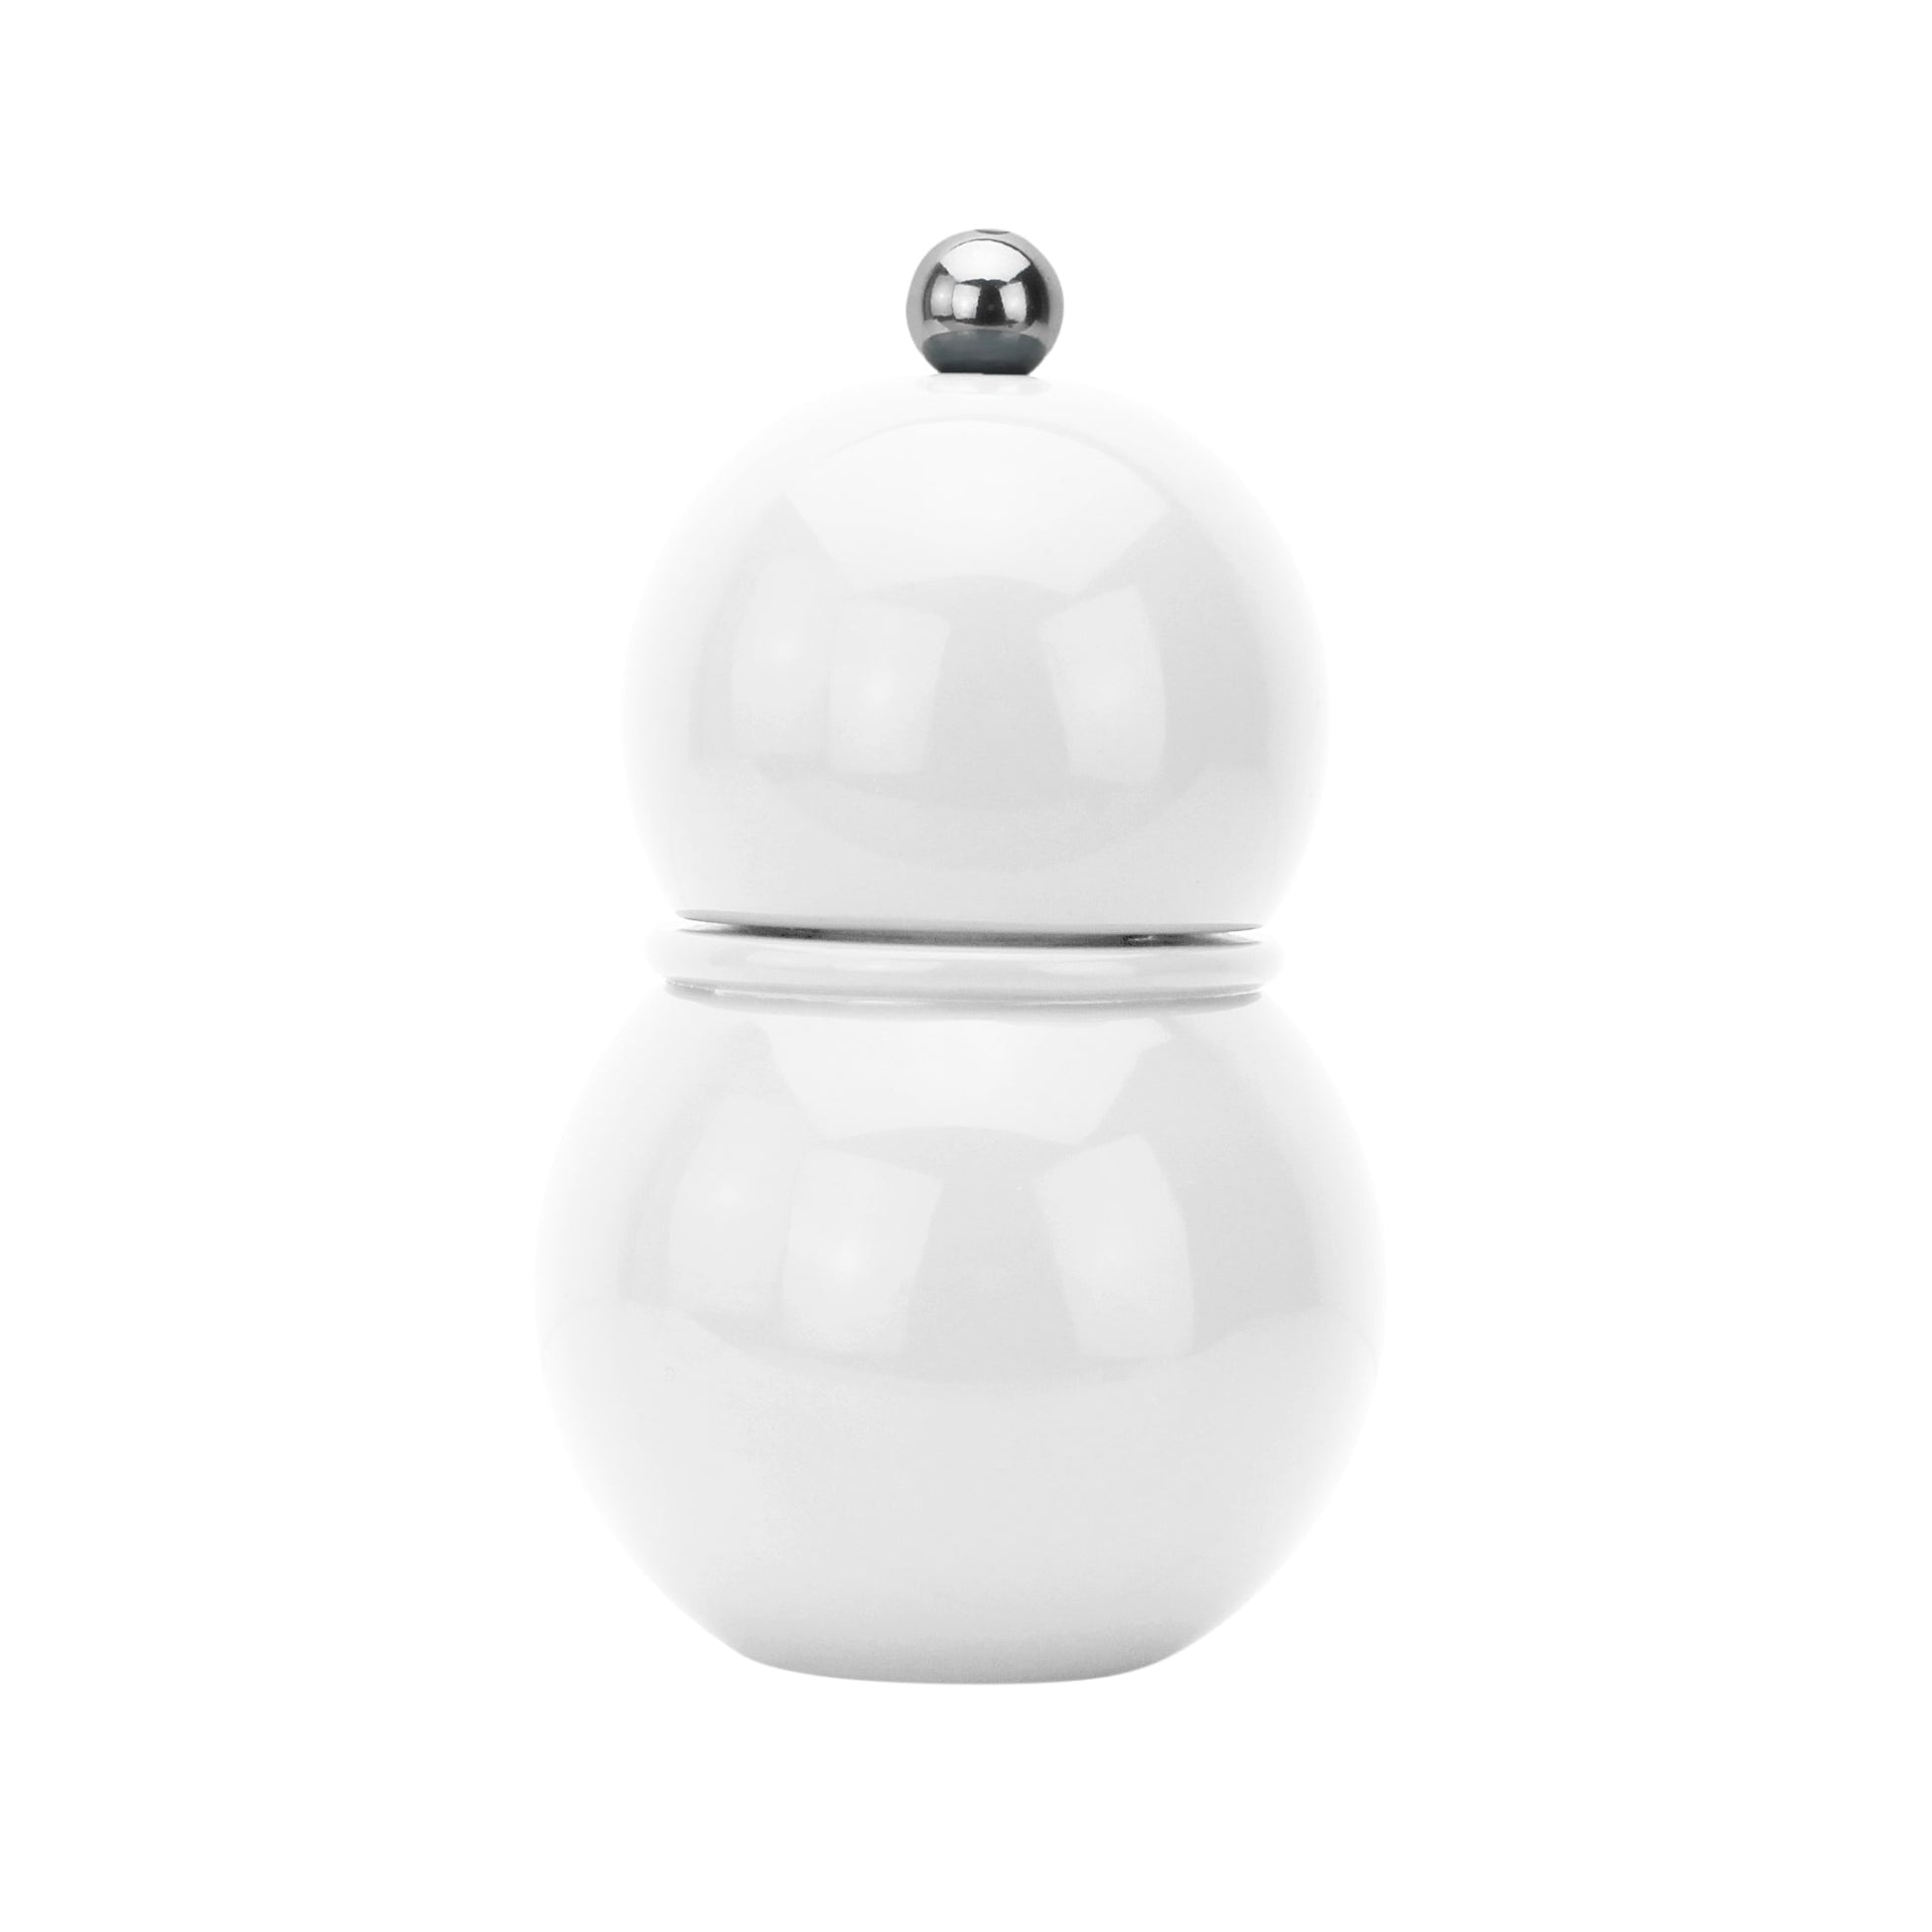 White Chubbie Salt or Pepper Mill, lacquered, small size - Addison Ross Ltd UK